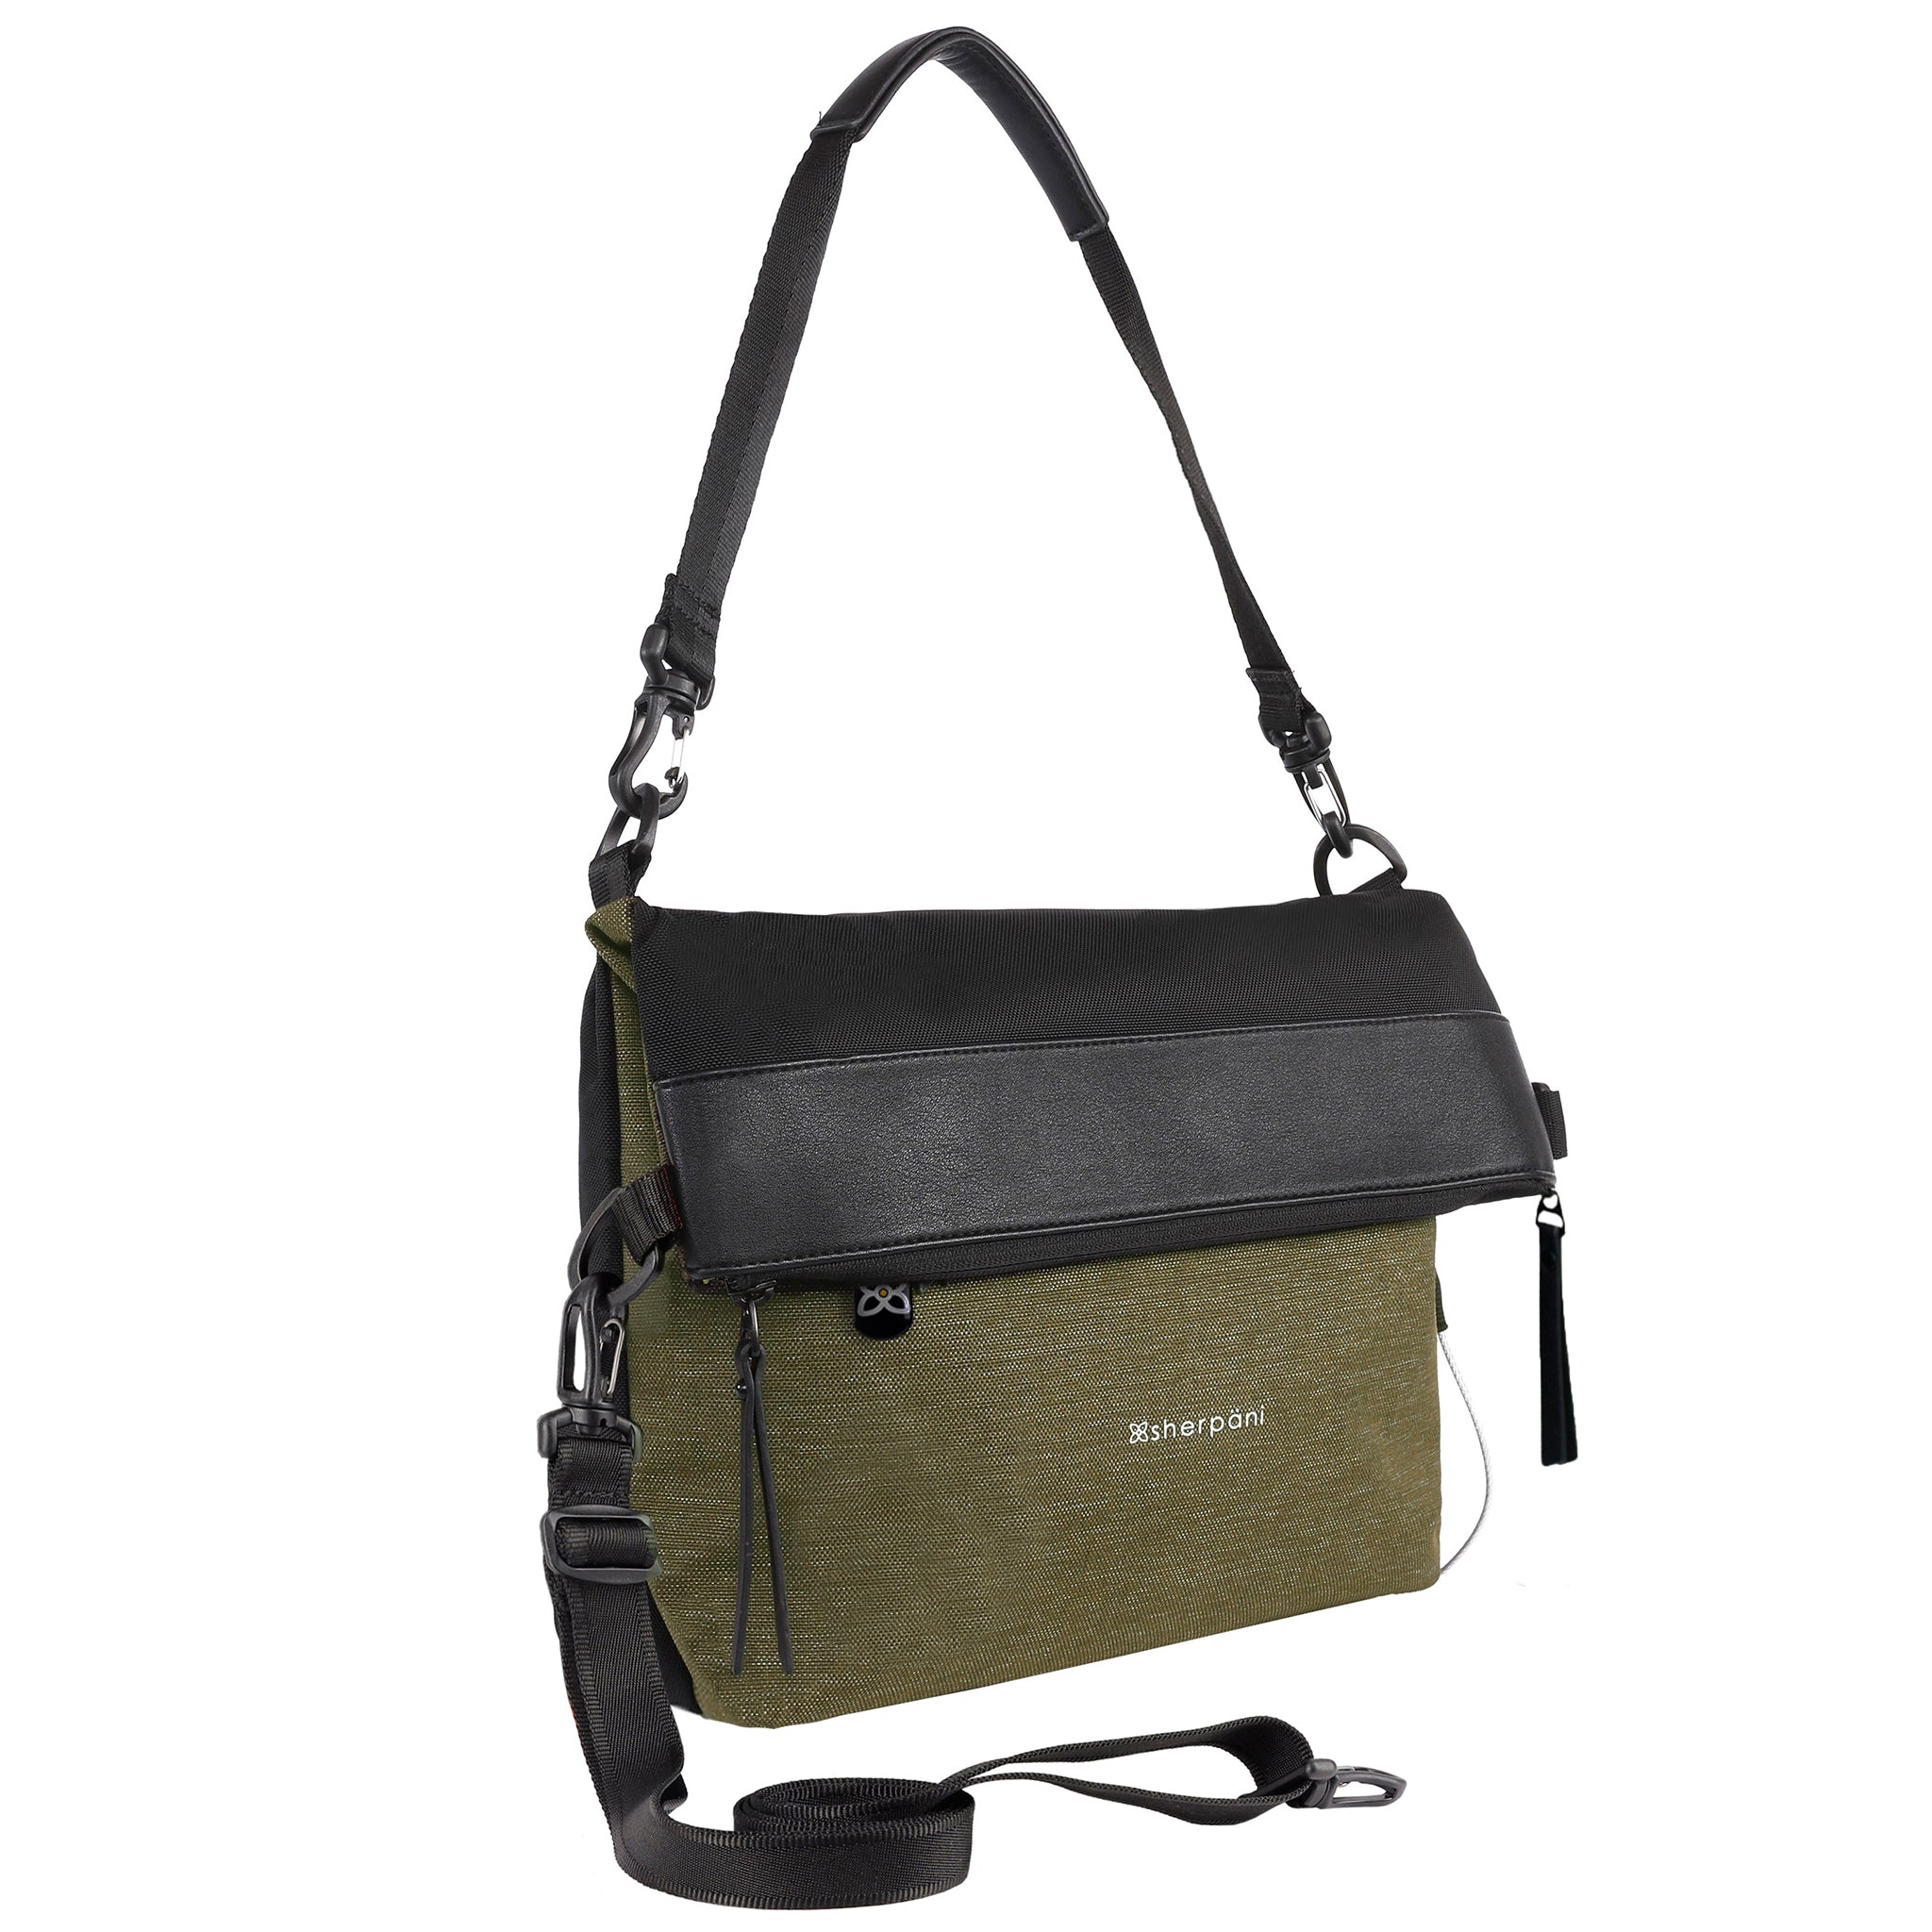 Angled front view of Sherpani's Anti-Theft bag, the Vale AT in Loden, with vegan leather accents in black. The top is folded over creating a signature overlap look. A chair loop lock is connected to a key fob clip on one side. It has an adjustable/detachable crossbody strap, and a second detachable strap fixed at a shorter length. #color_loden